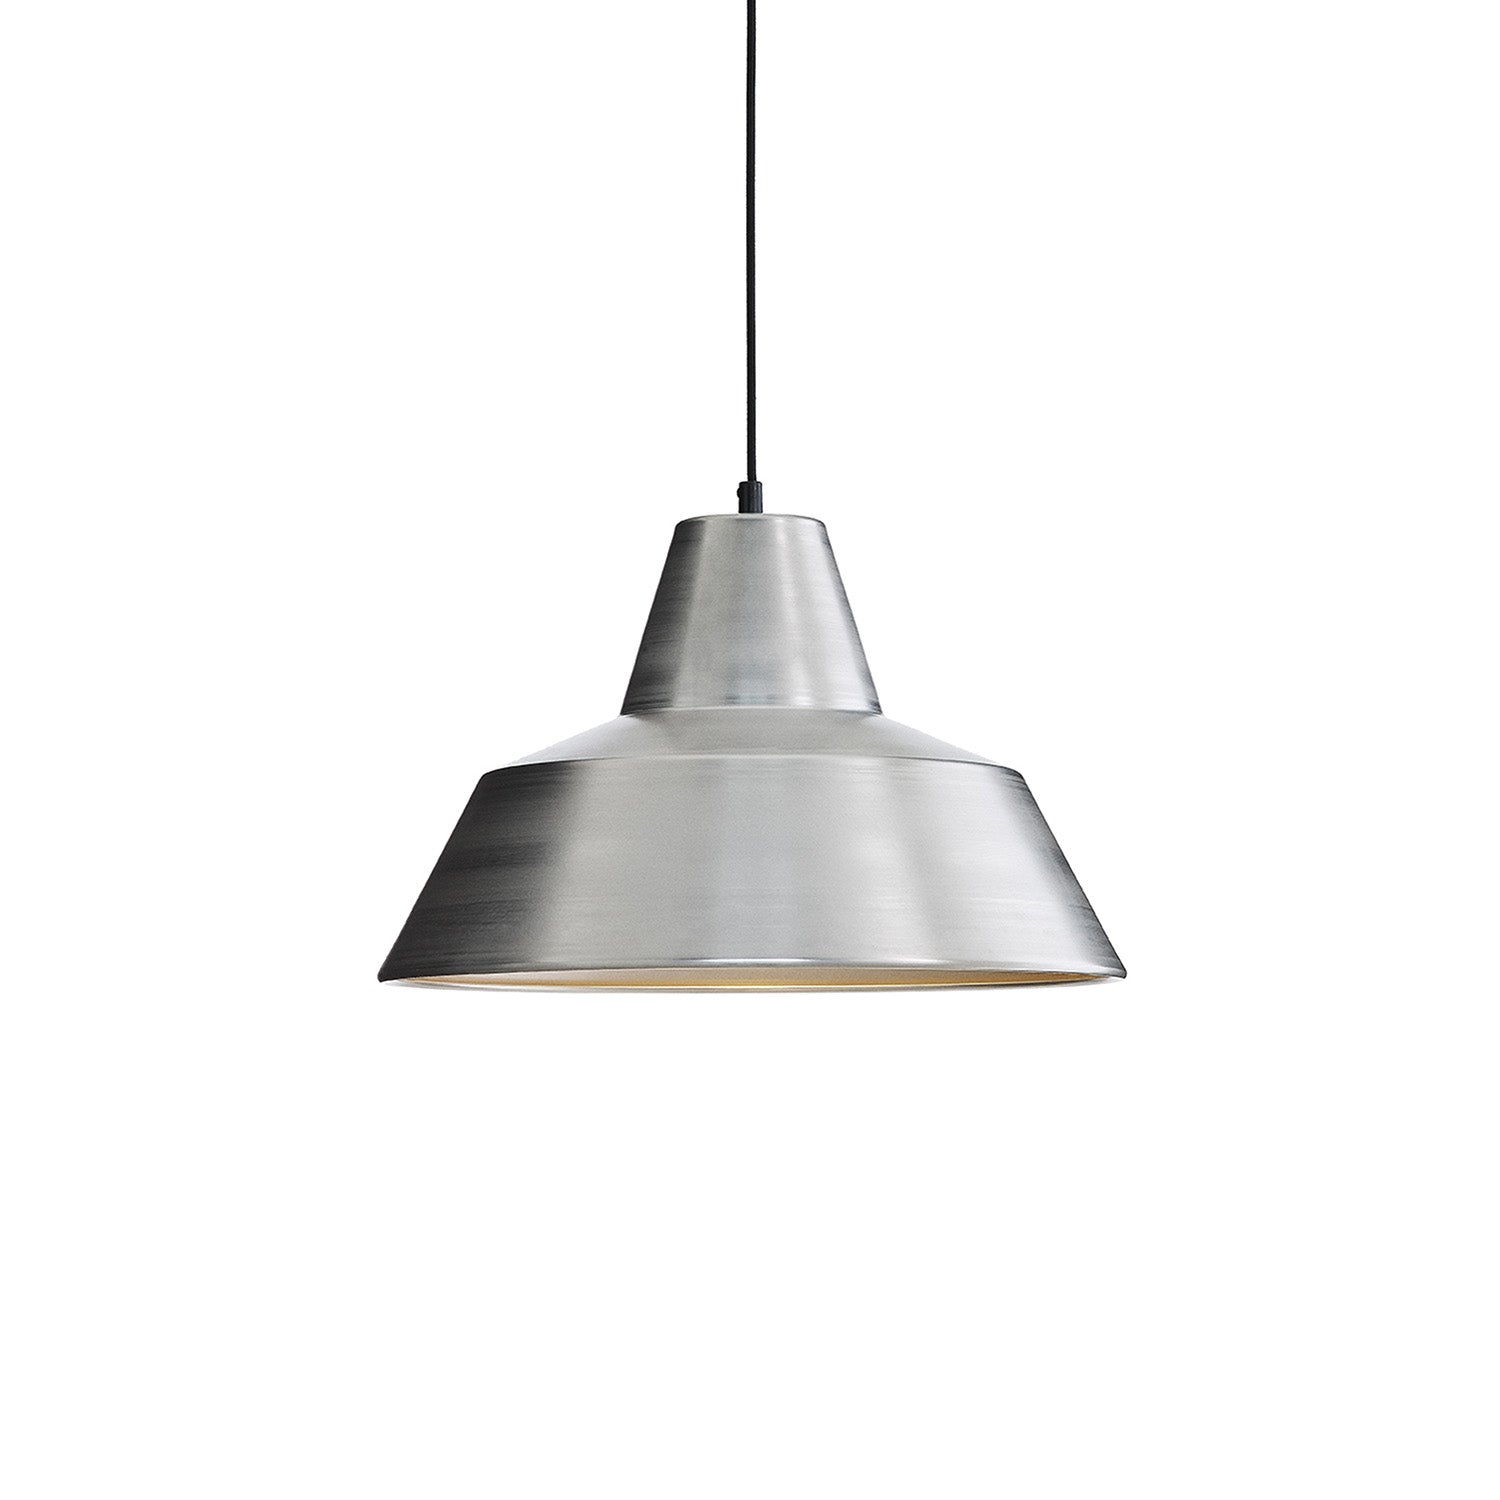 WORKSHOP - Industrial conical kitchen or dining room pendant lamp